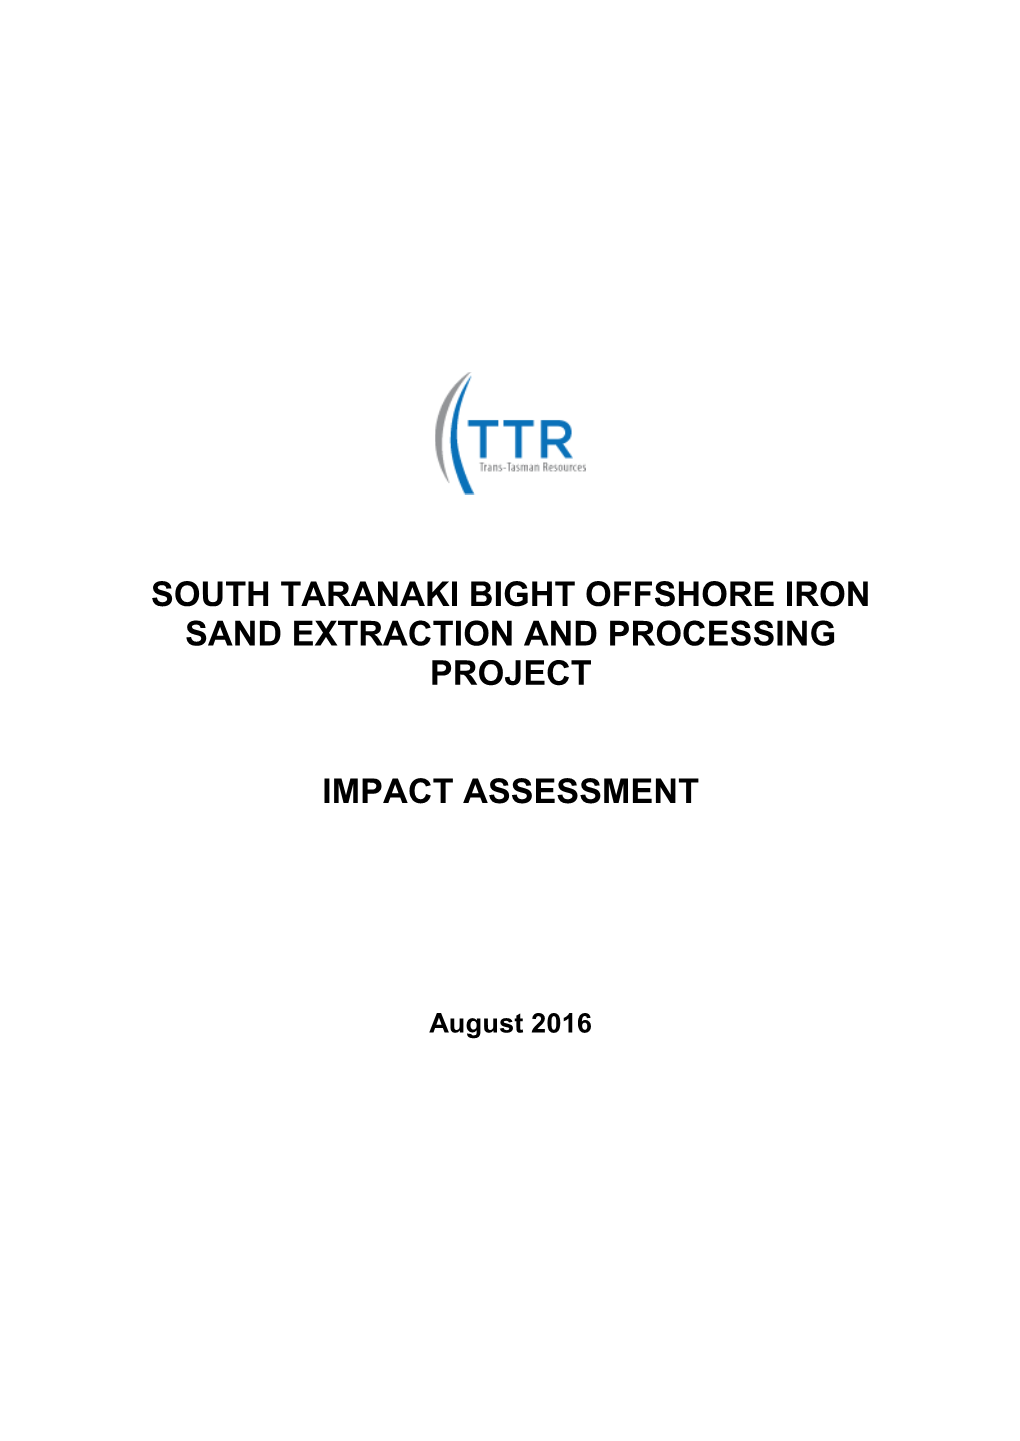 South Taranaki Bight Offshore Iron Sand Extraction and Processing Project